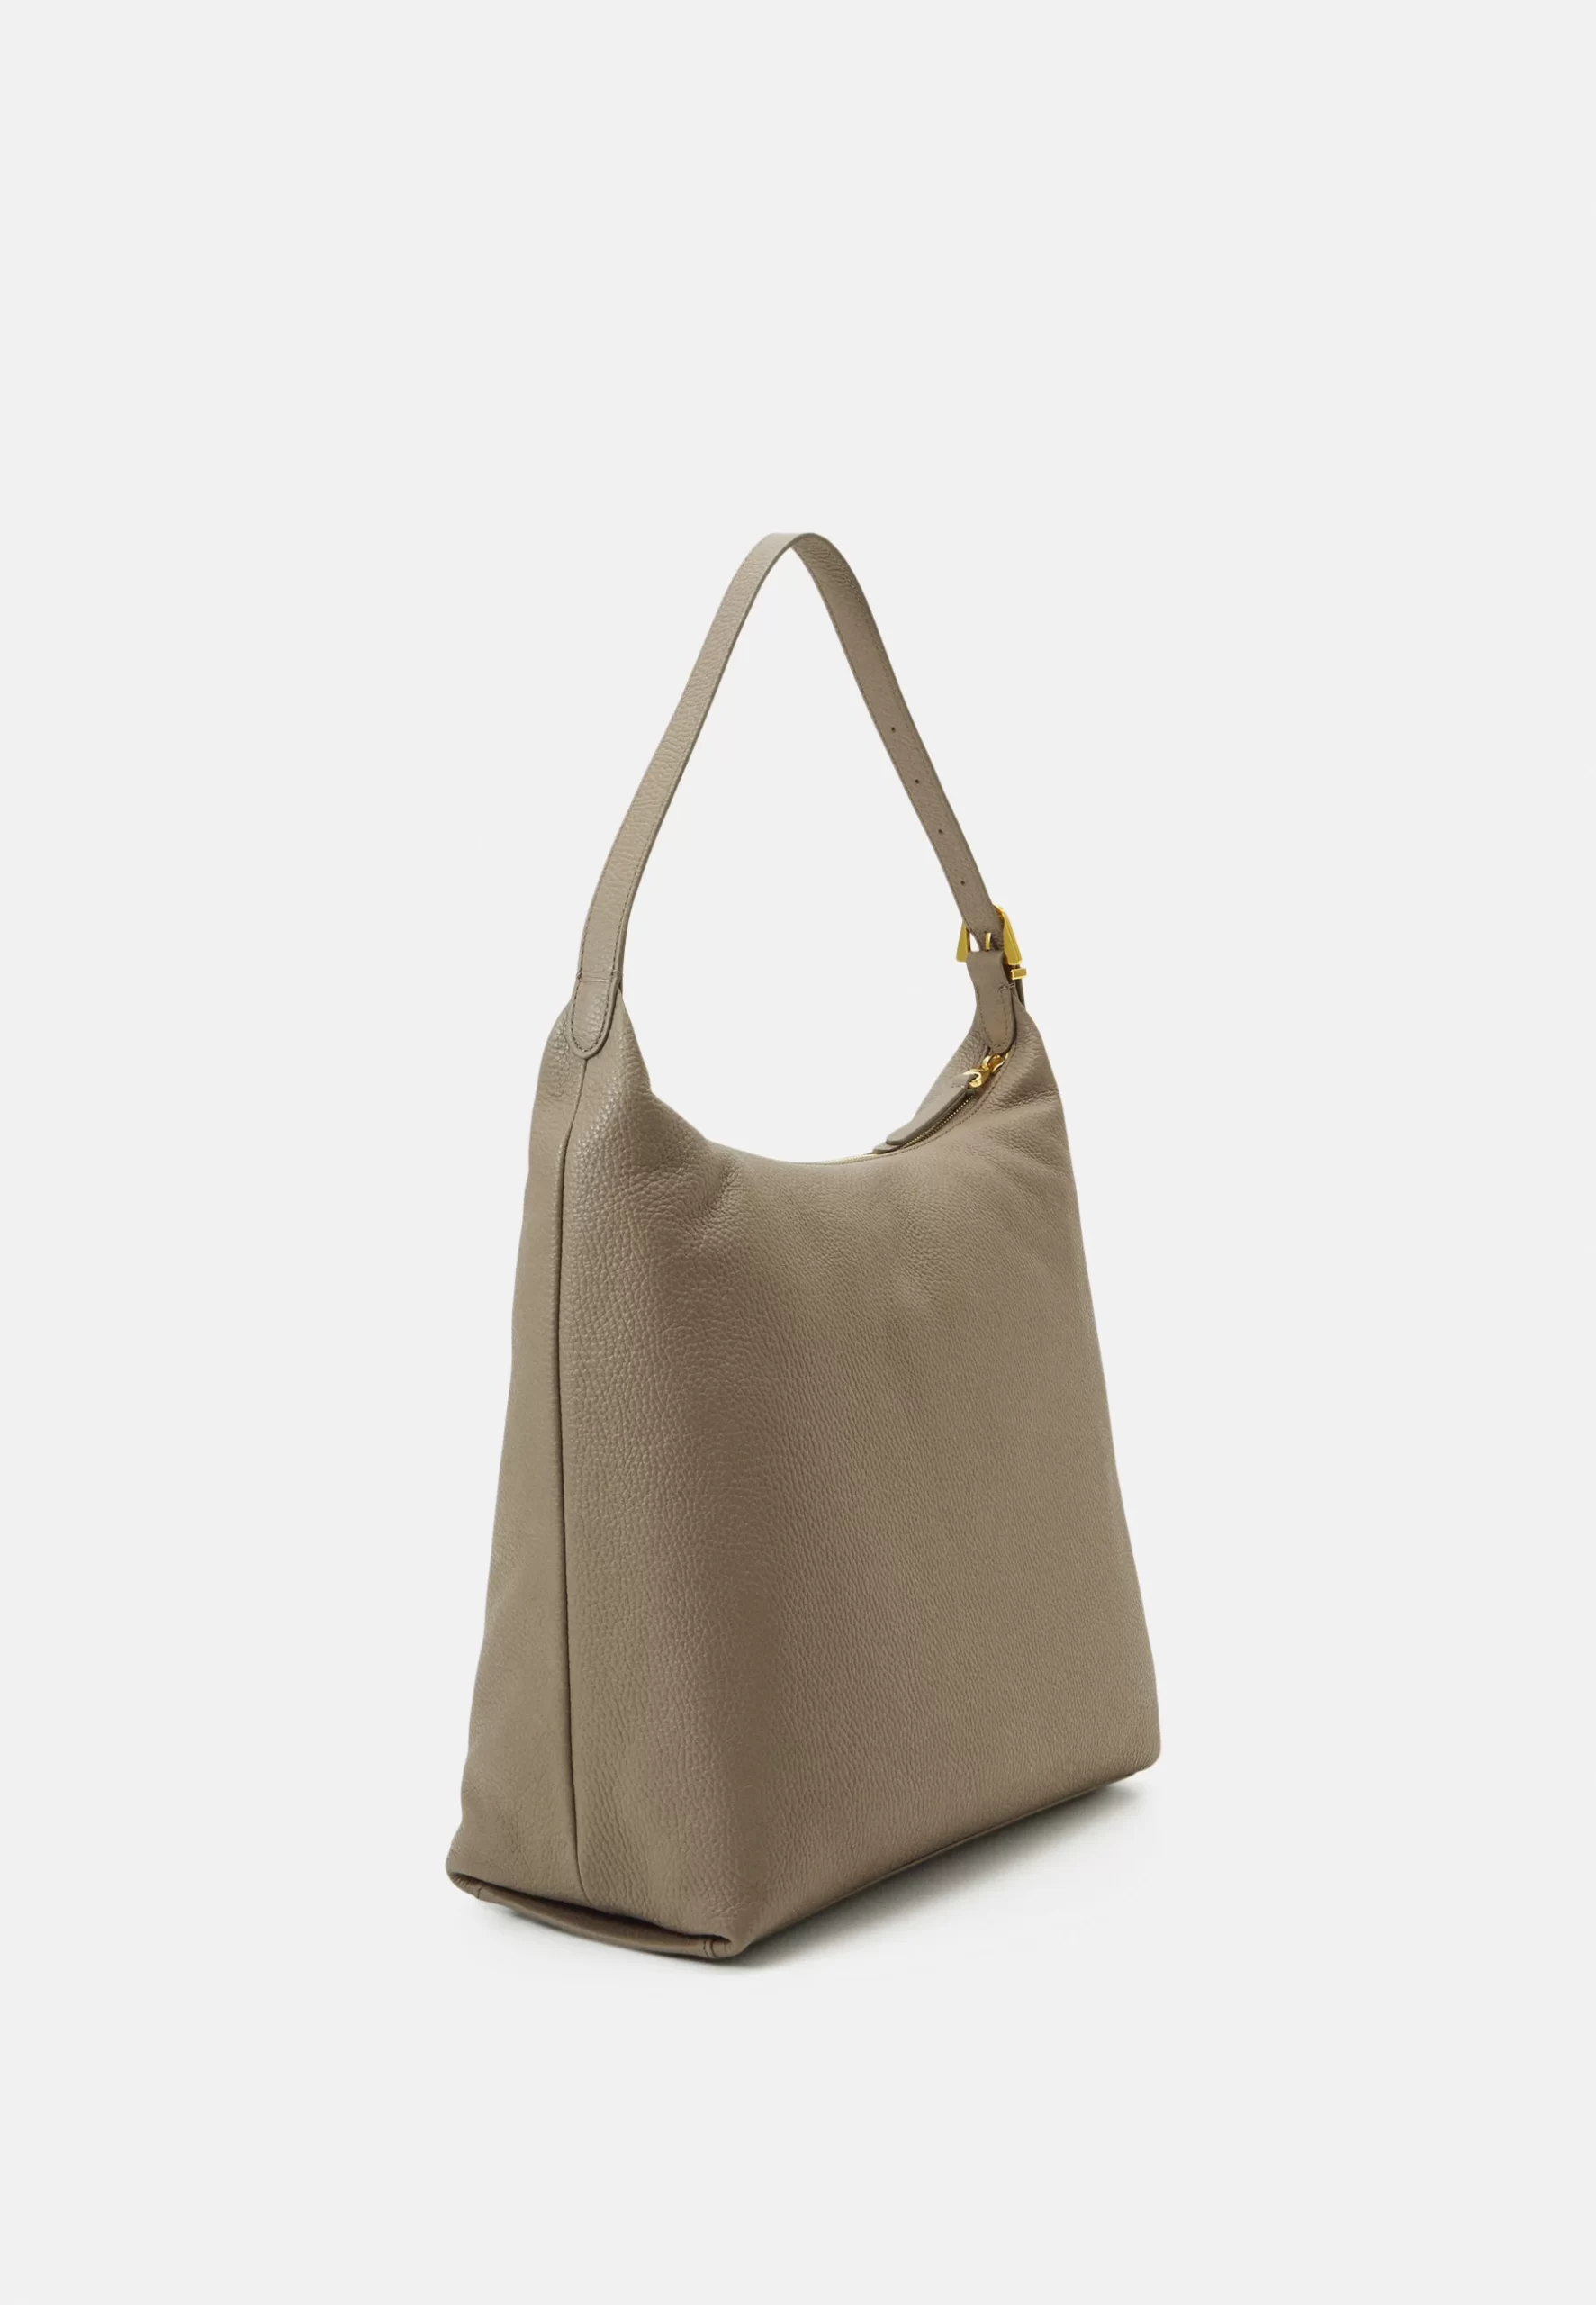 Coccinelle Gleen Tote in Warm Taupe